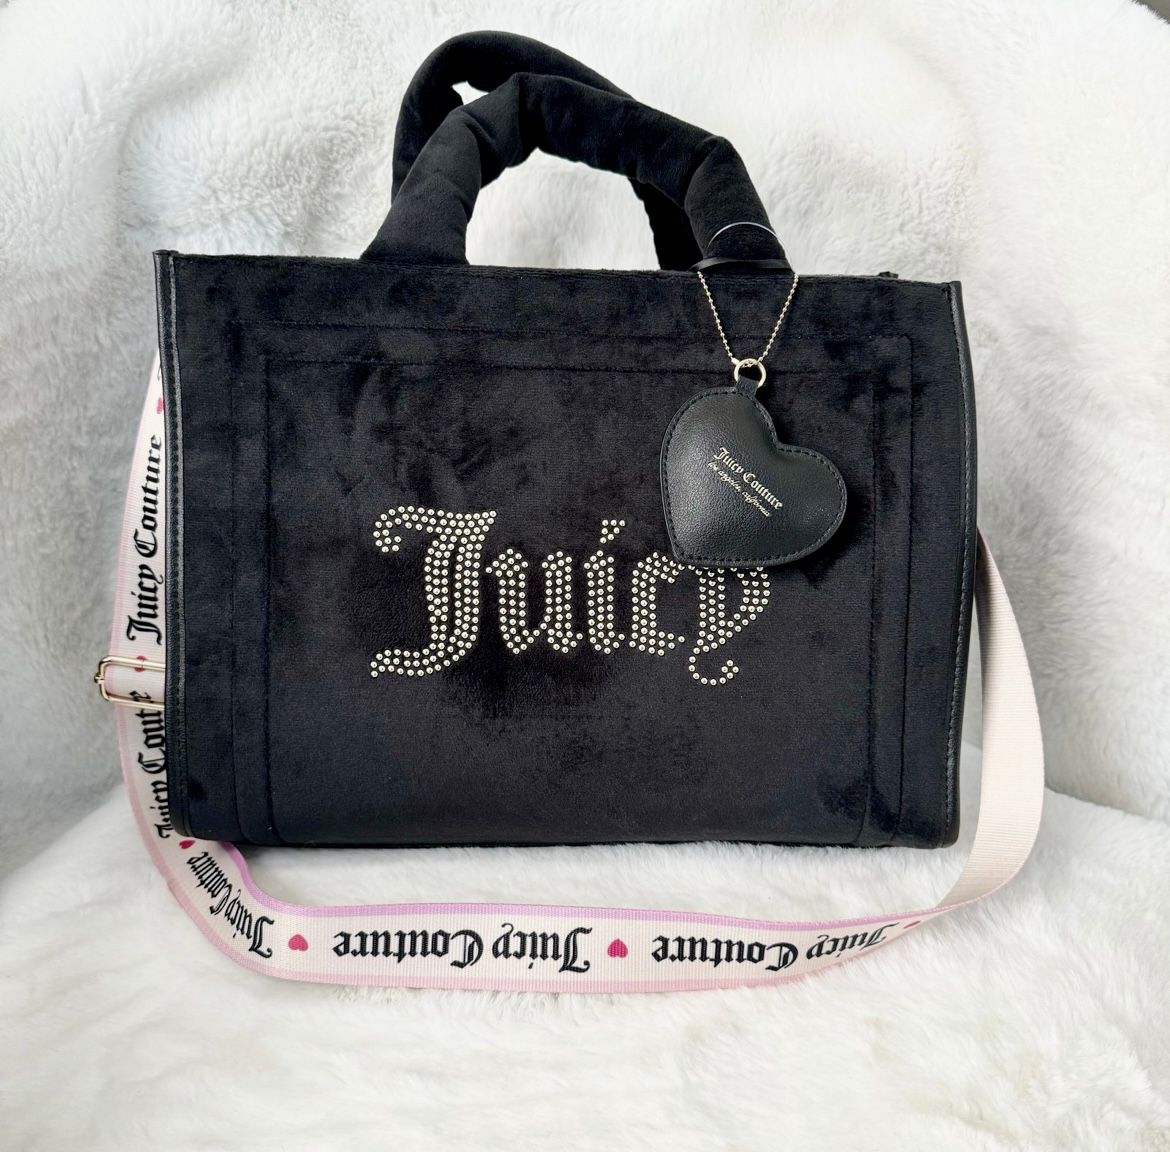 Juicy Couture Extra  Spender Tote